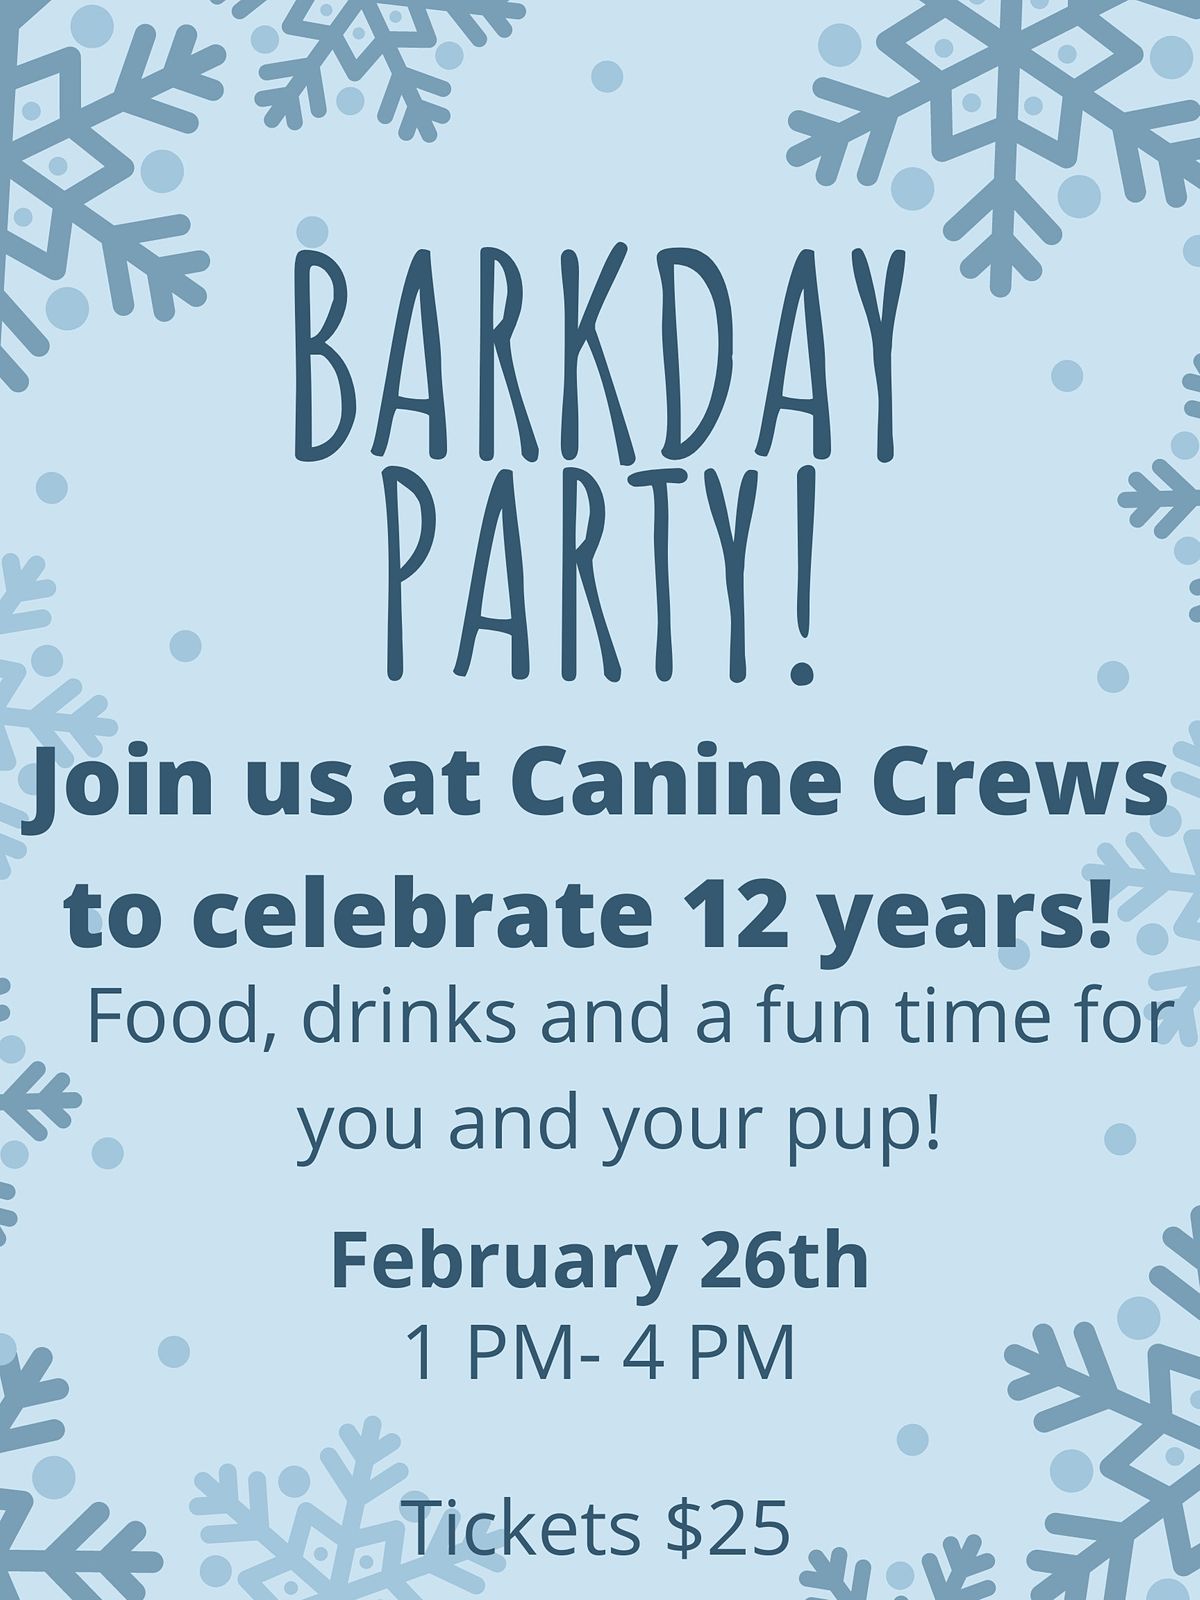 Barkday Party - celebrating 12 years of Canine Crews